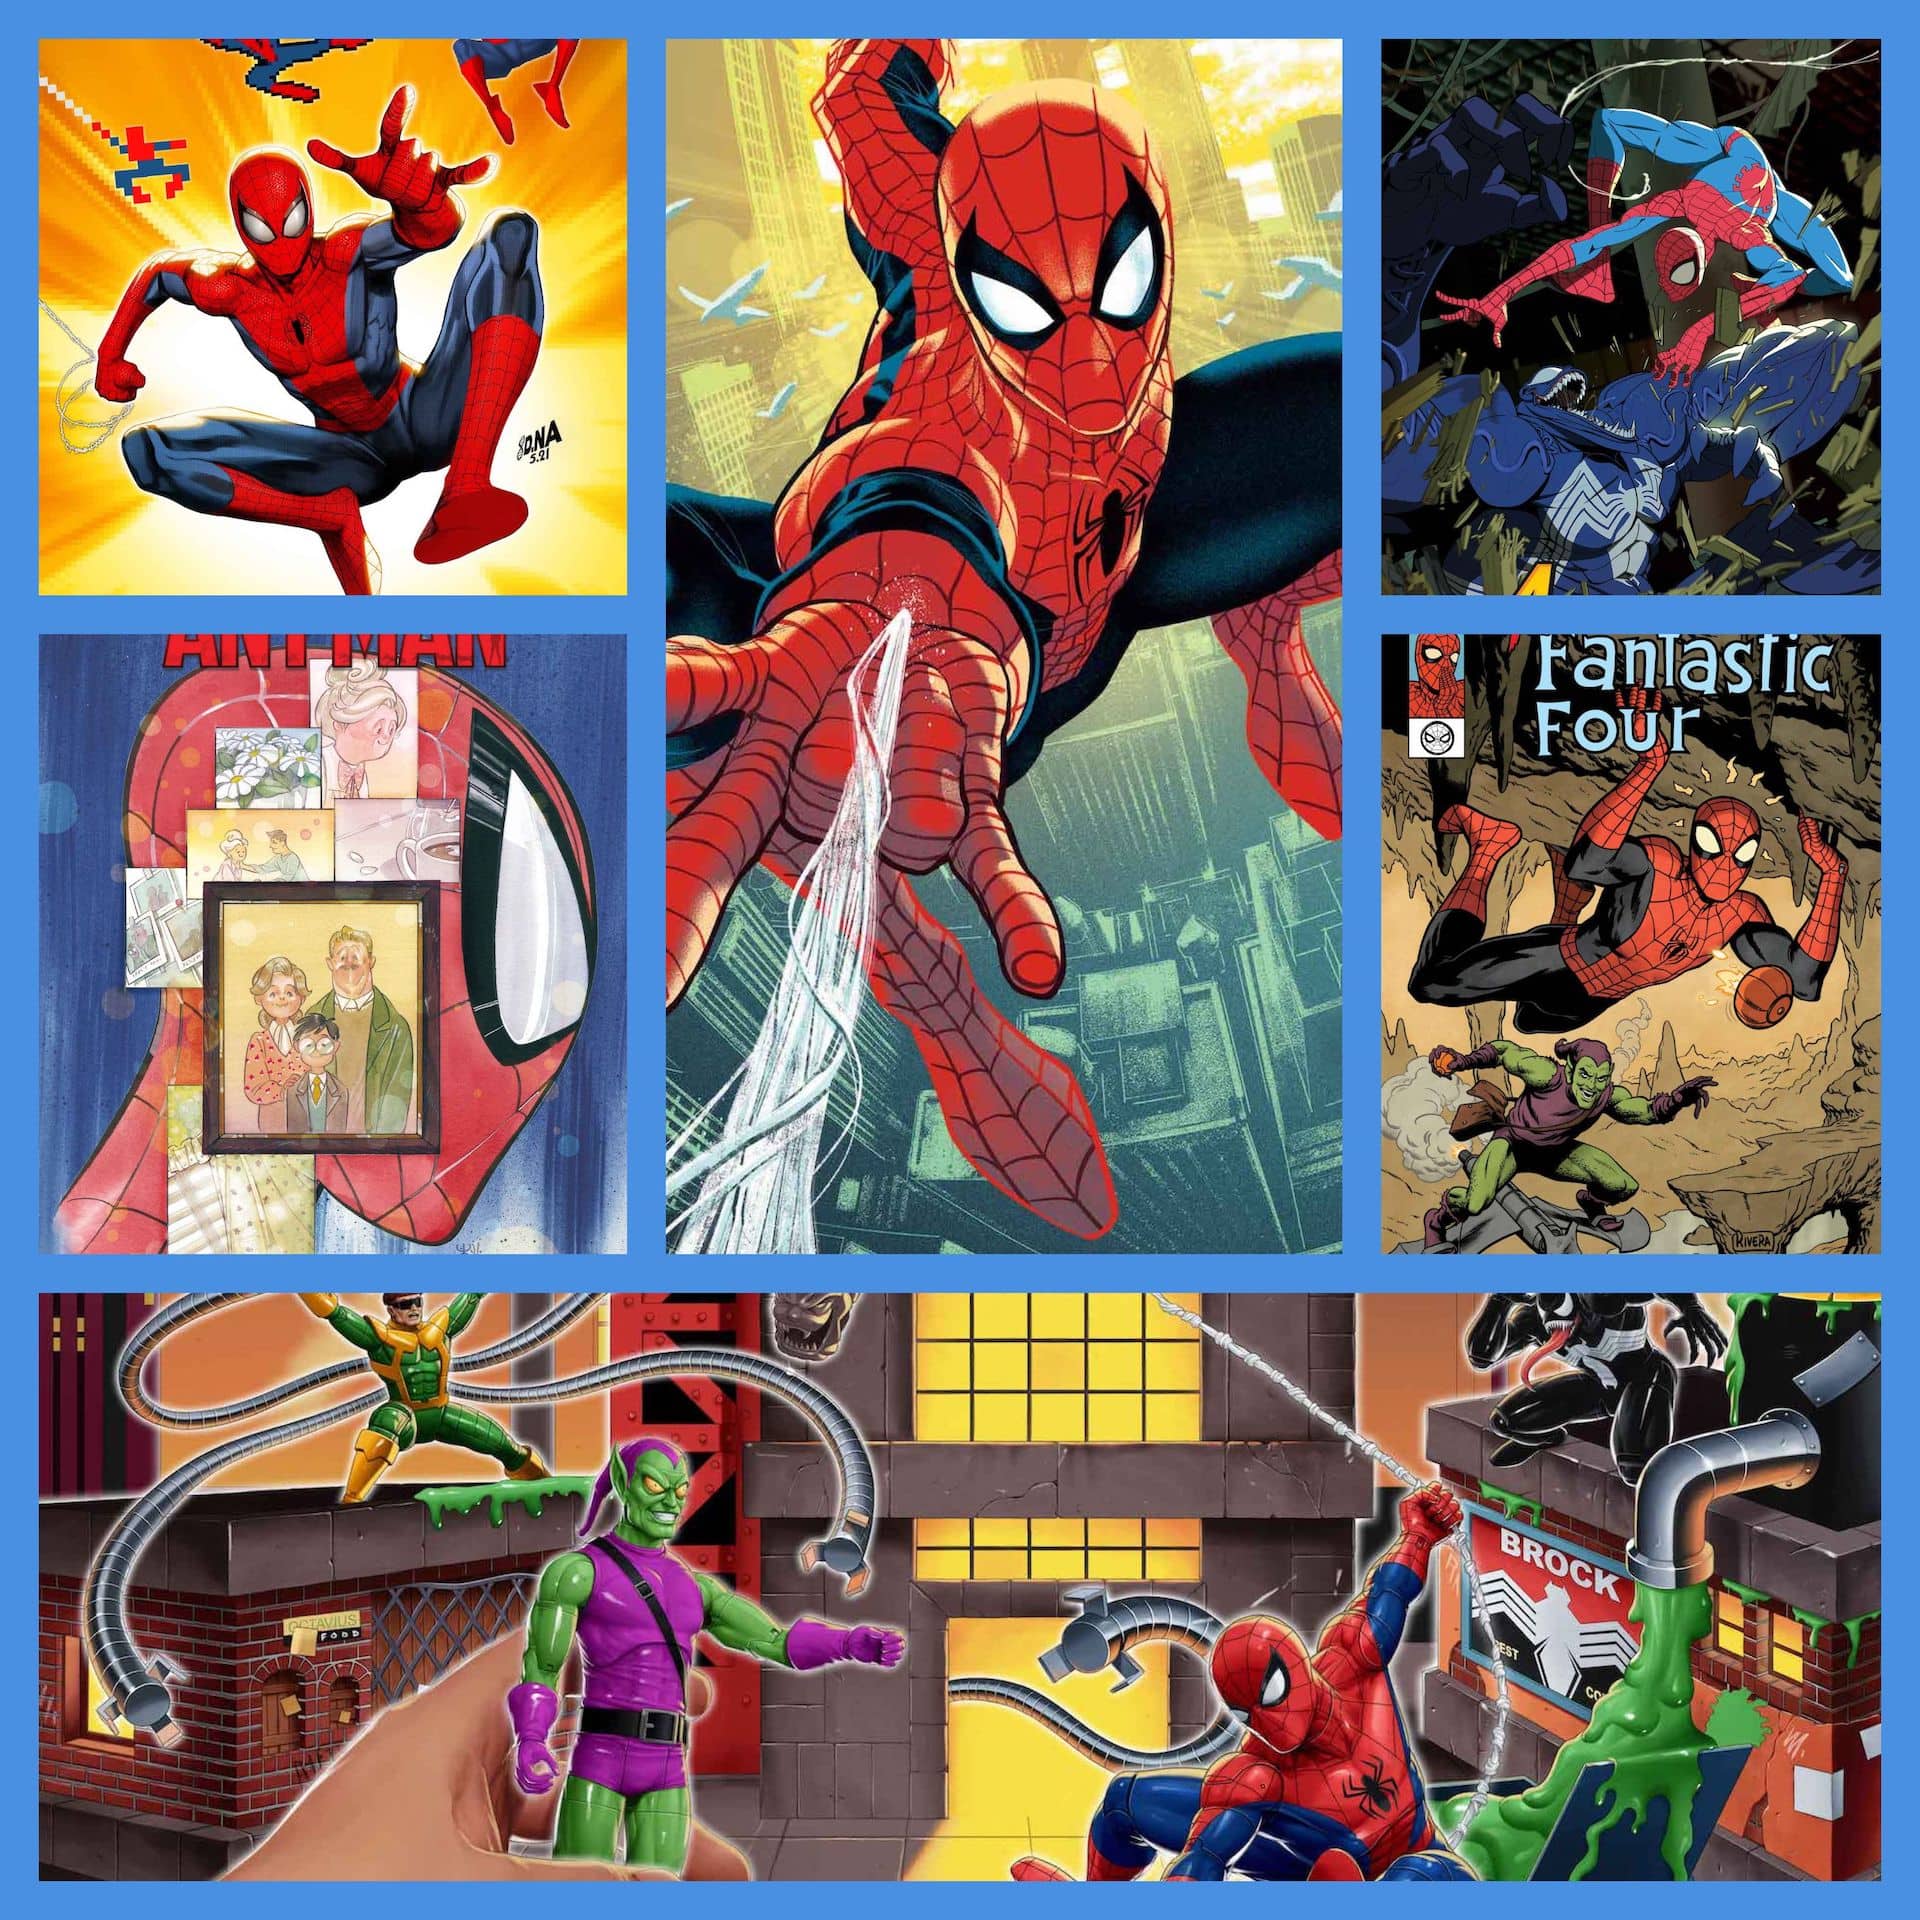 Marvel's 'Beyond Amazing' variant covers set to celebrate Spider-Man's 60th